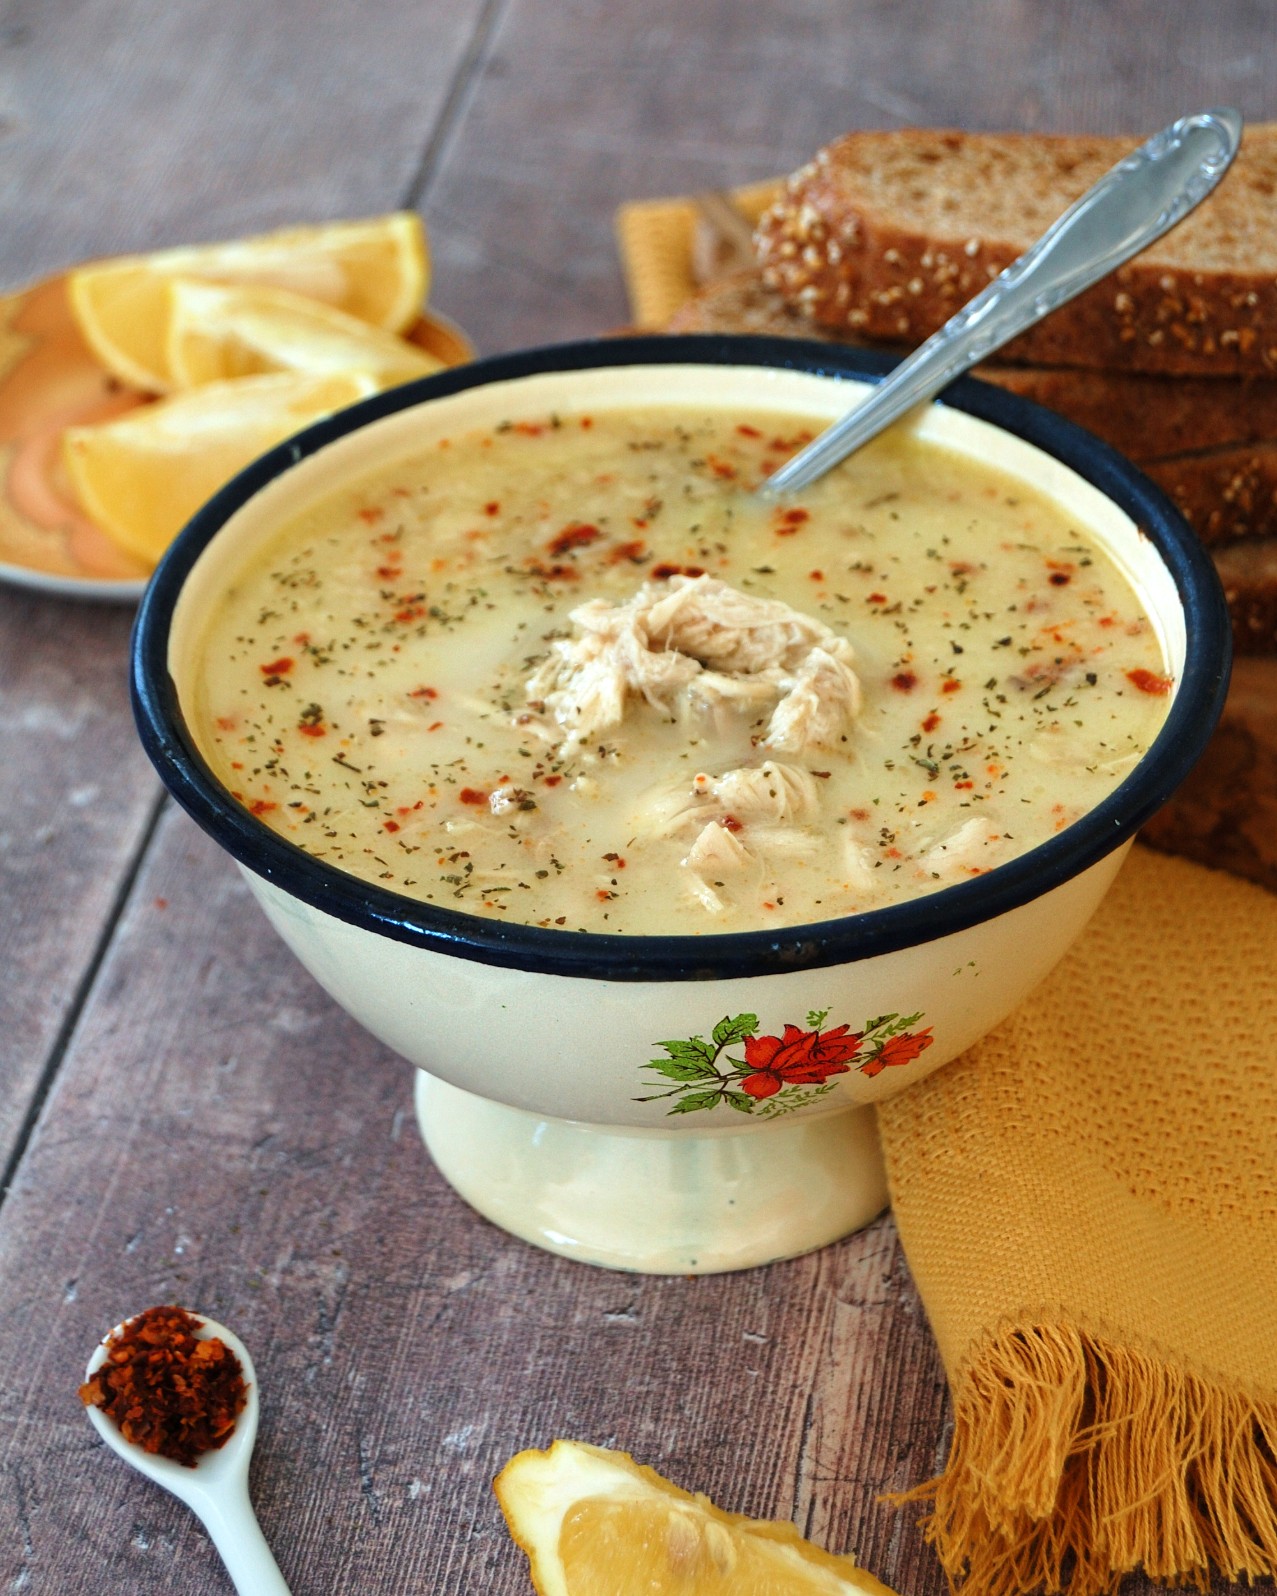 Vintage enamel bowl with sliky cream coloured chicken soup recipe. Lemon wedges and sliced brown bread to rear. Shredded chicken and pepper flakes can be seen on top of the Turkish soup